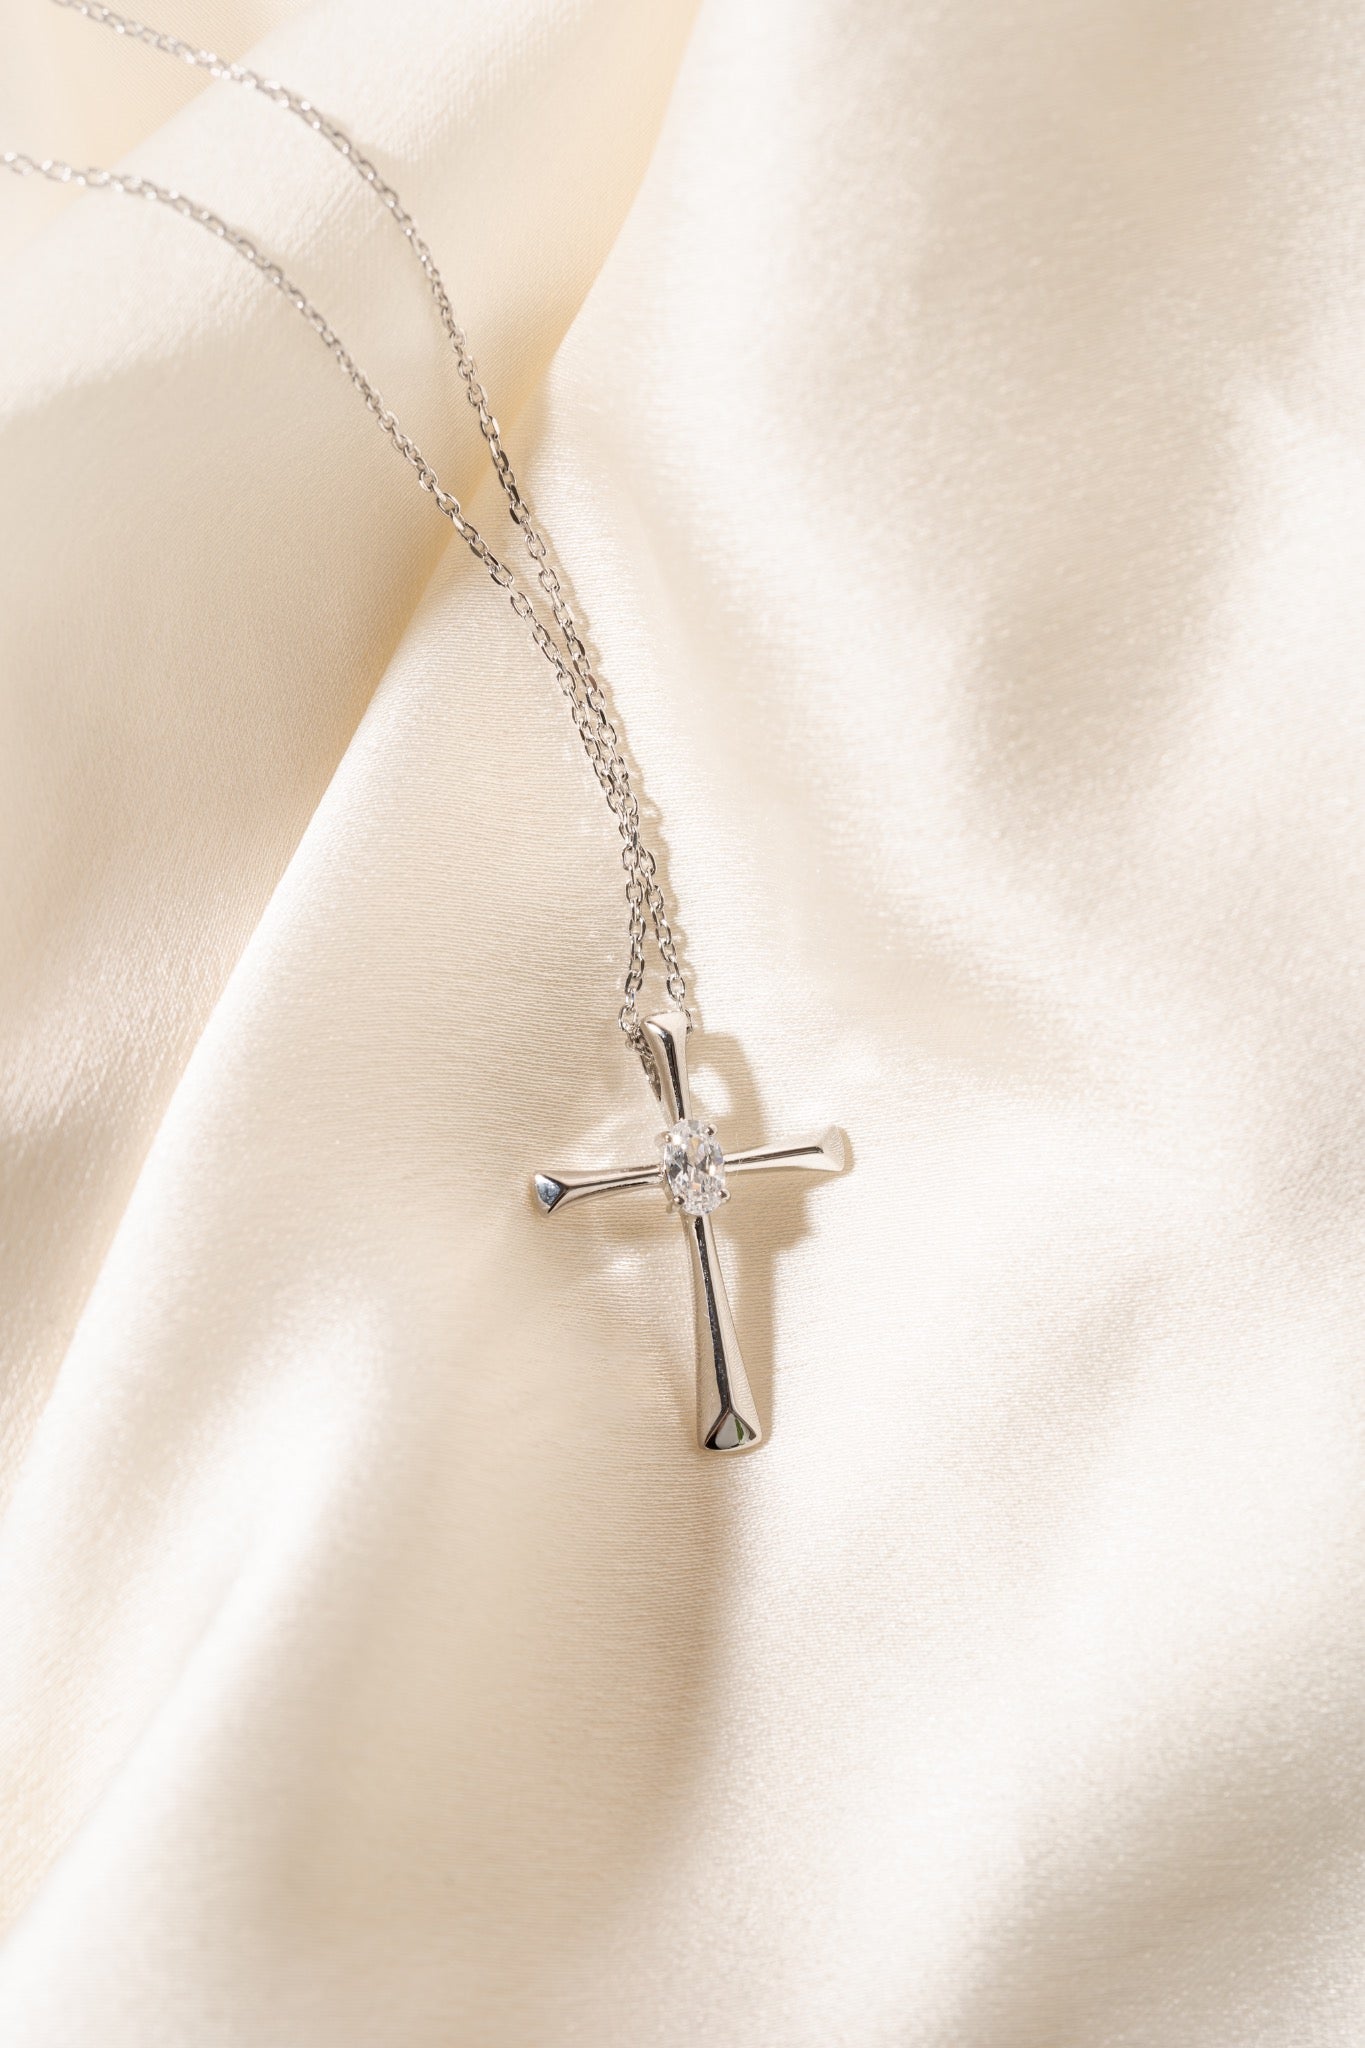 Diamondlite CZ 5x3mm oval cross pendant in sterling silver at Armans Jewellers Kitchener